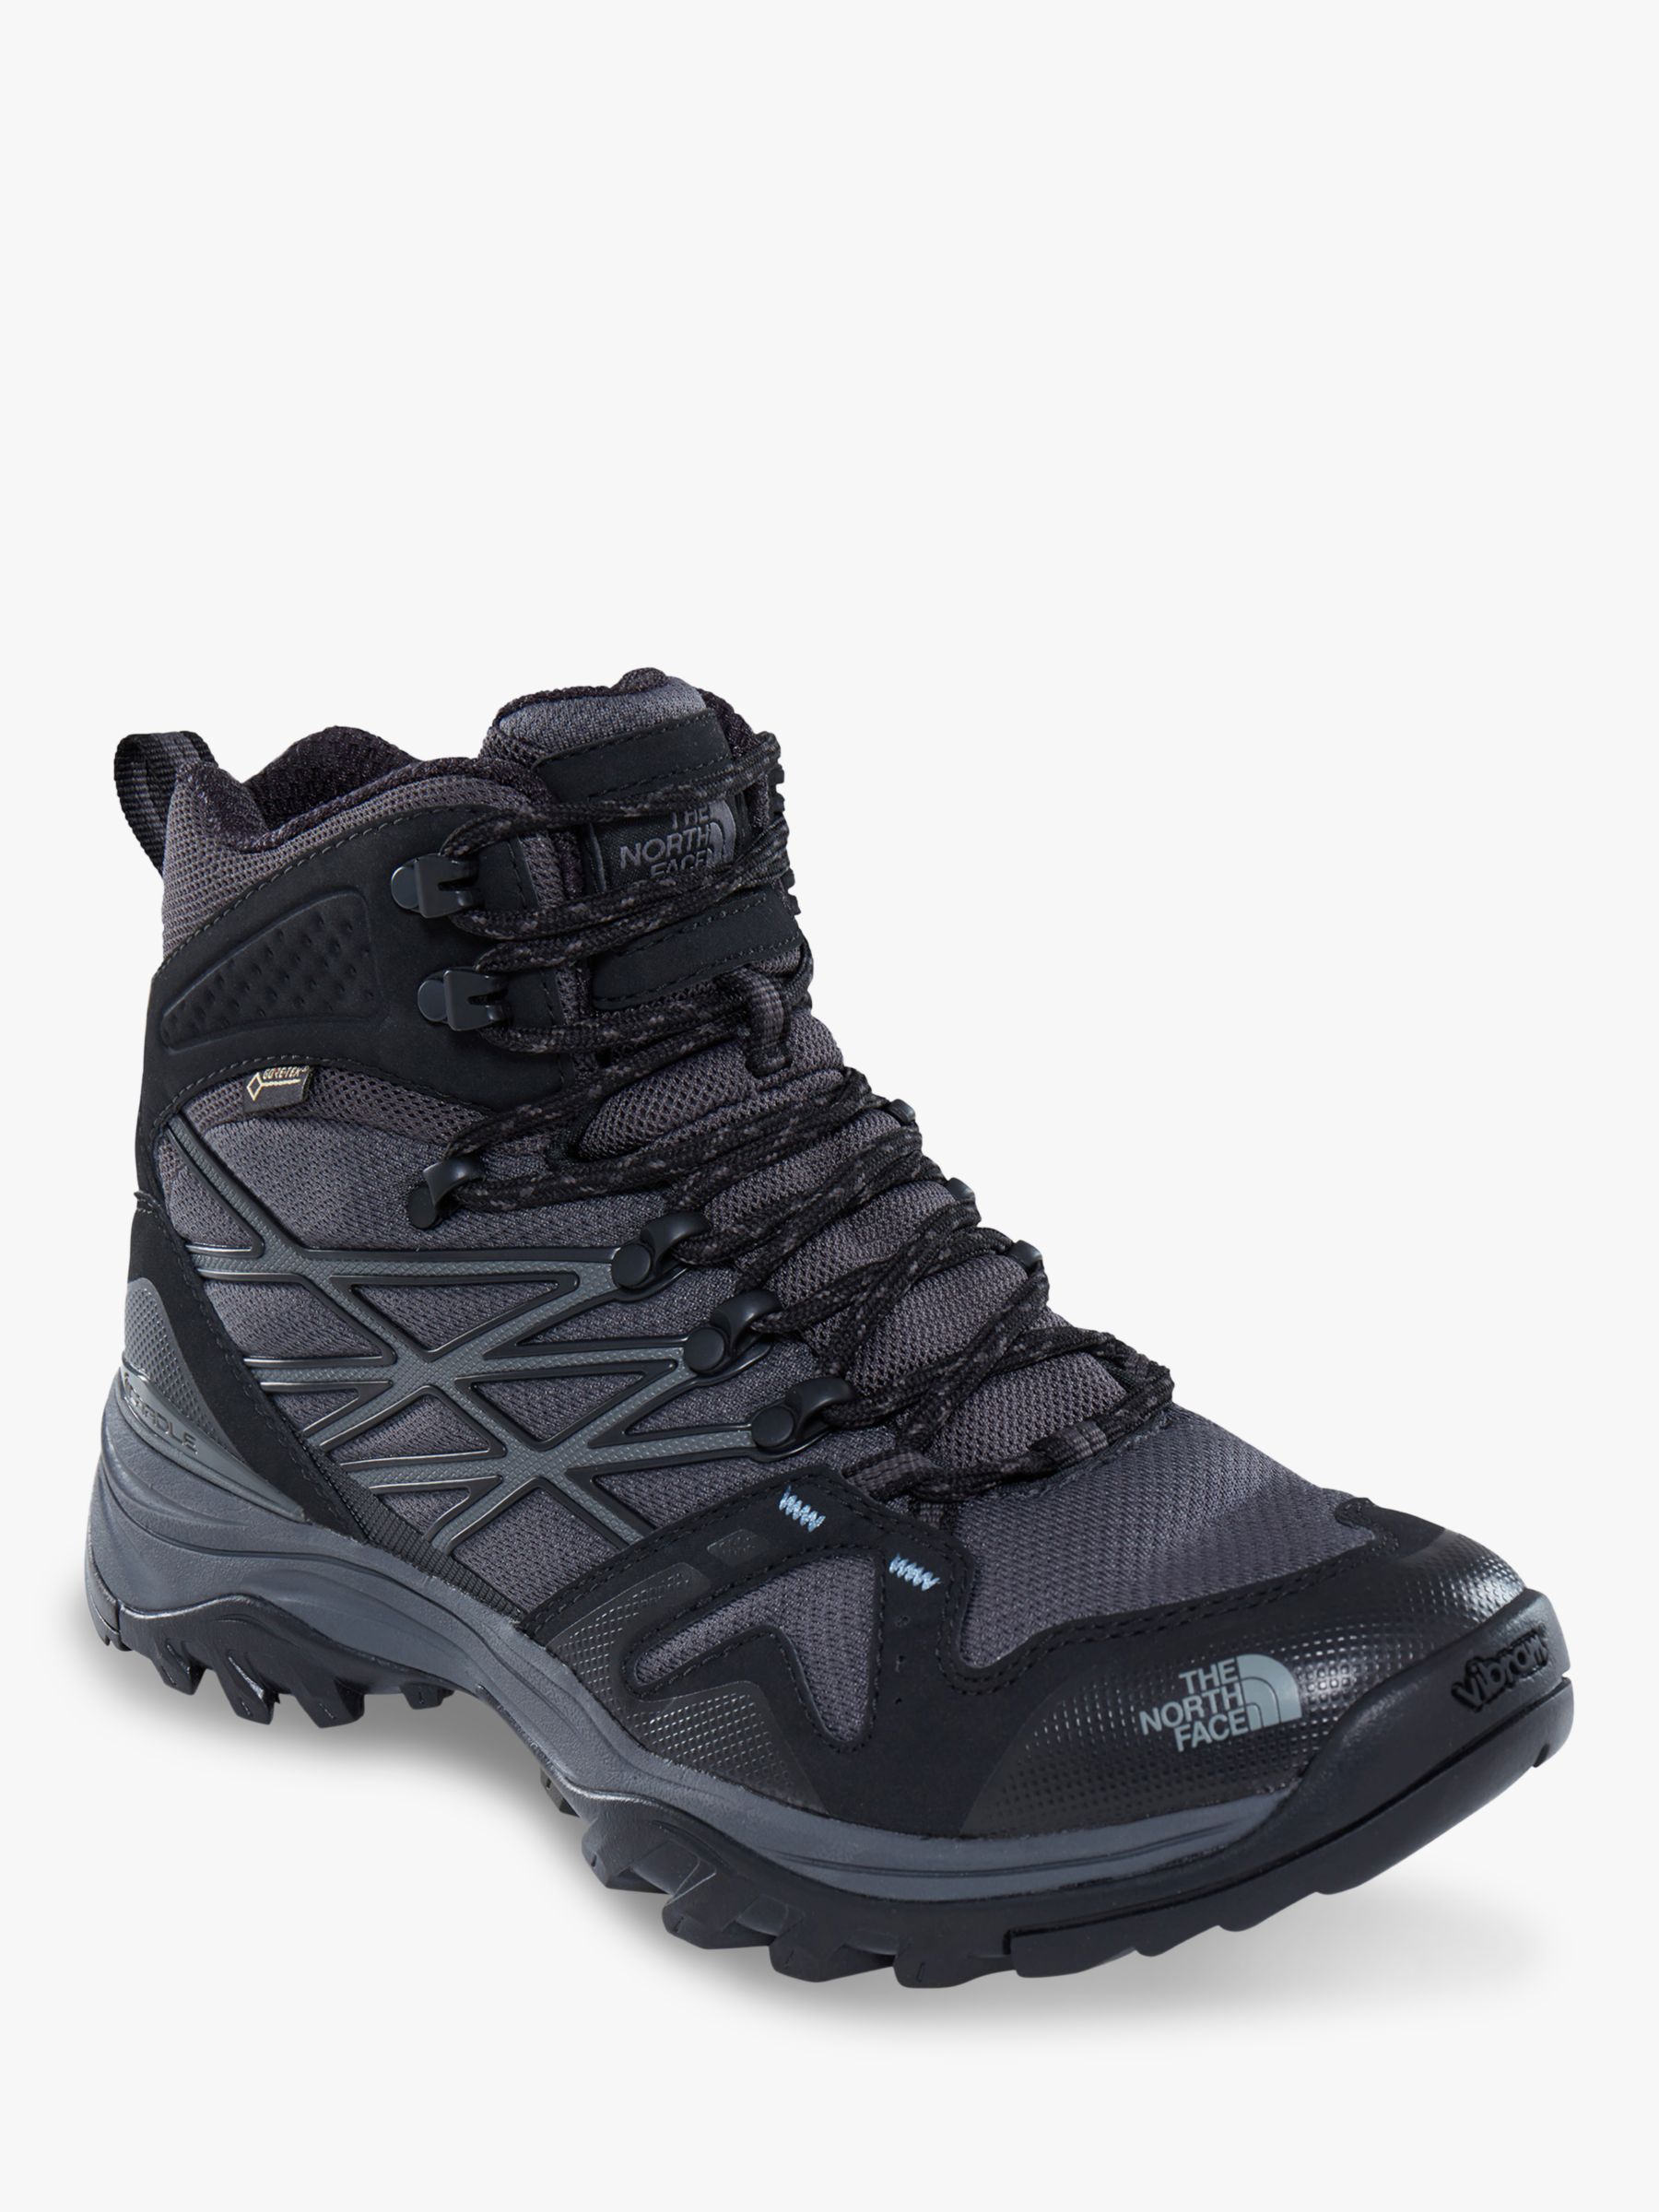 north face boots mens waterproof